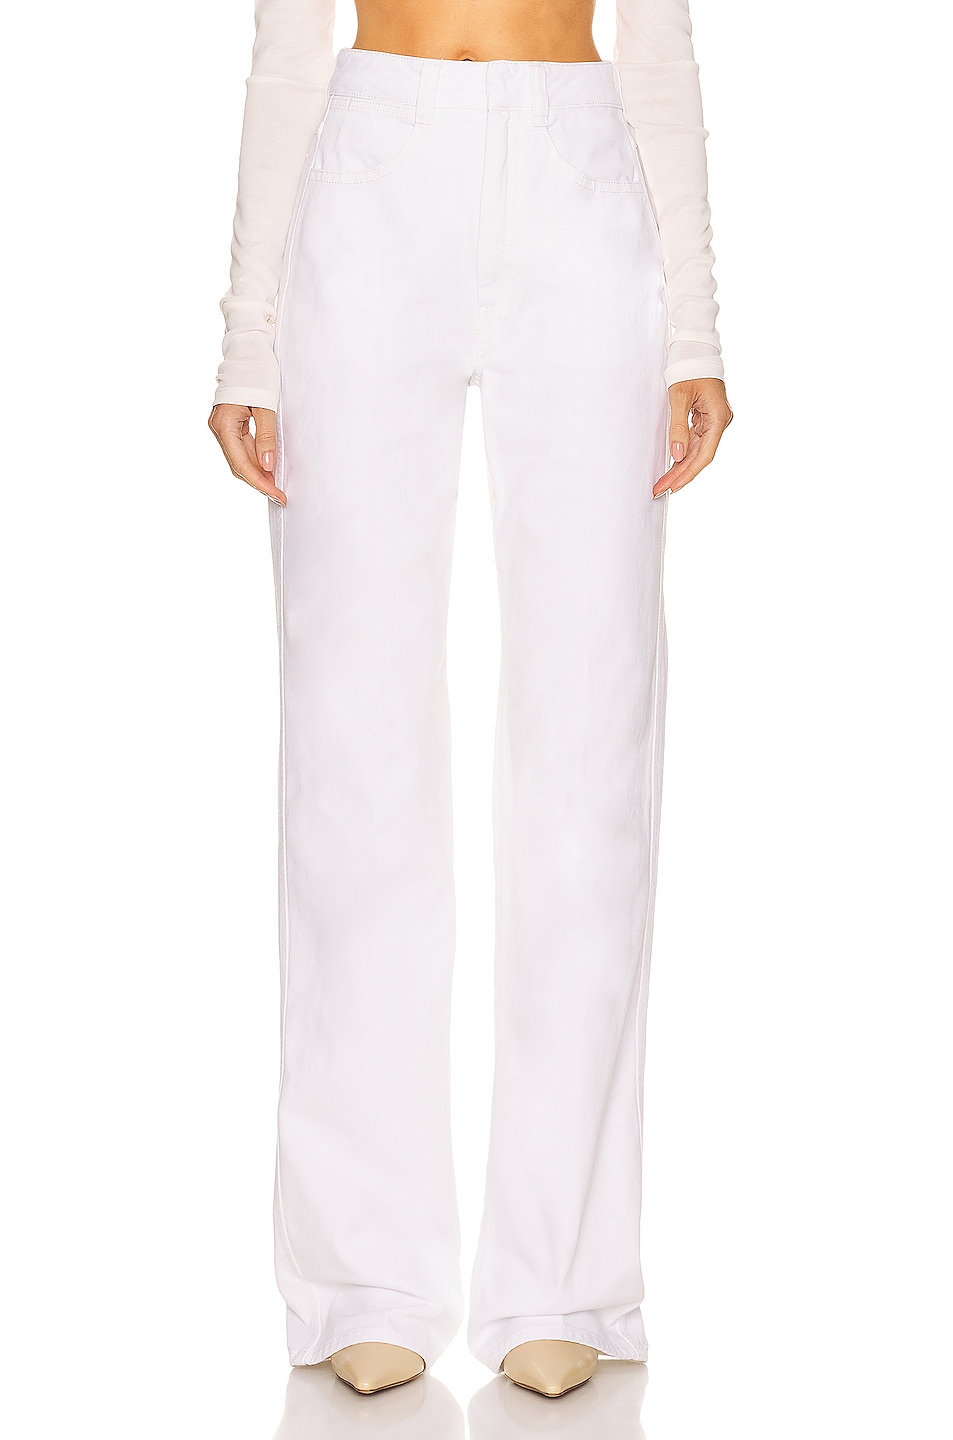 Image 1 of Lemaire Denim High Waisted Pant in White